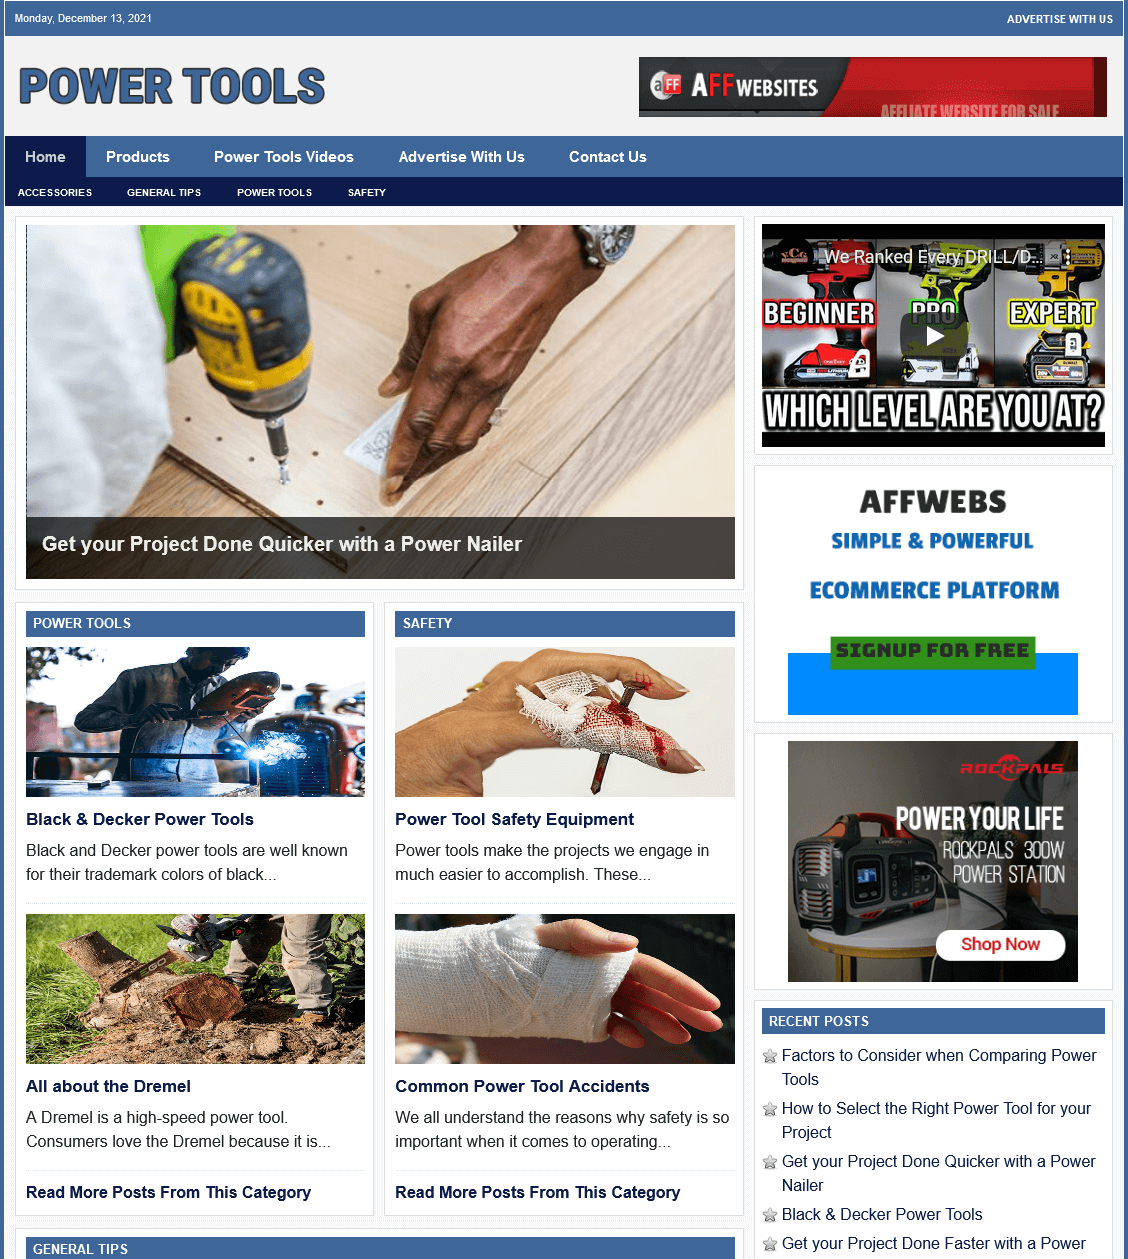 POWER TOOLS Website Business For Sale - Work From Home Internet Business